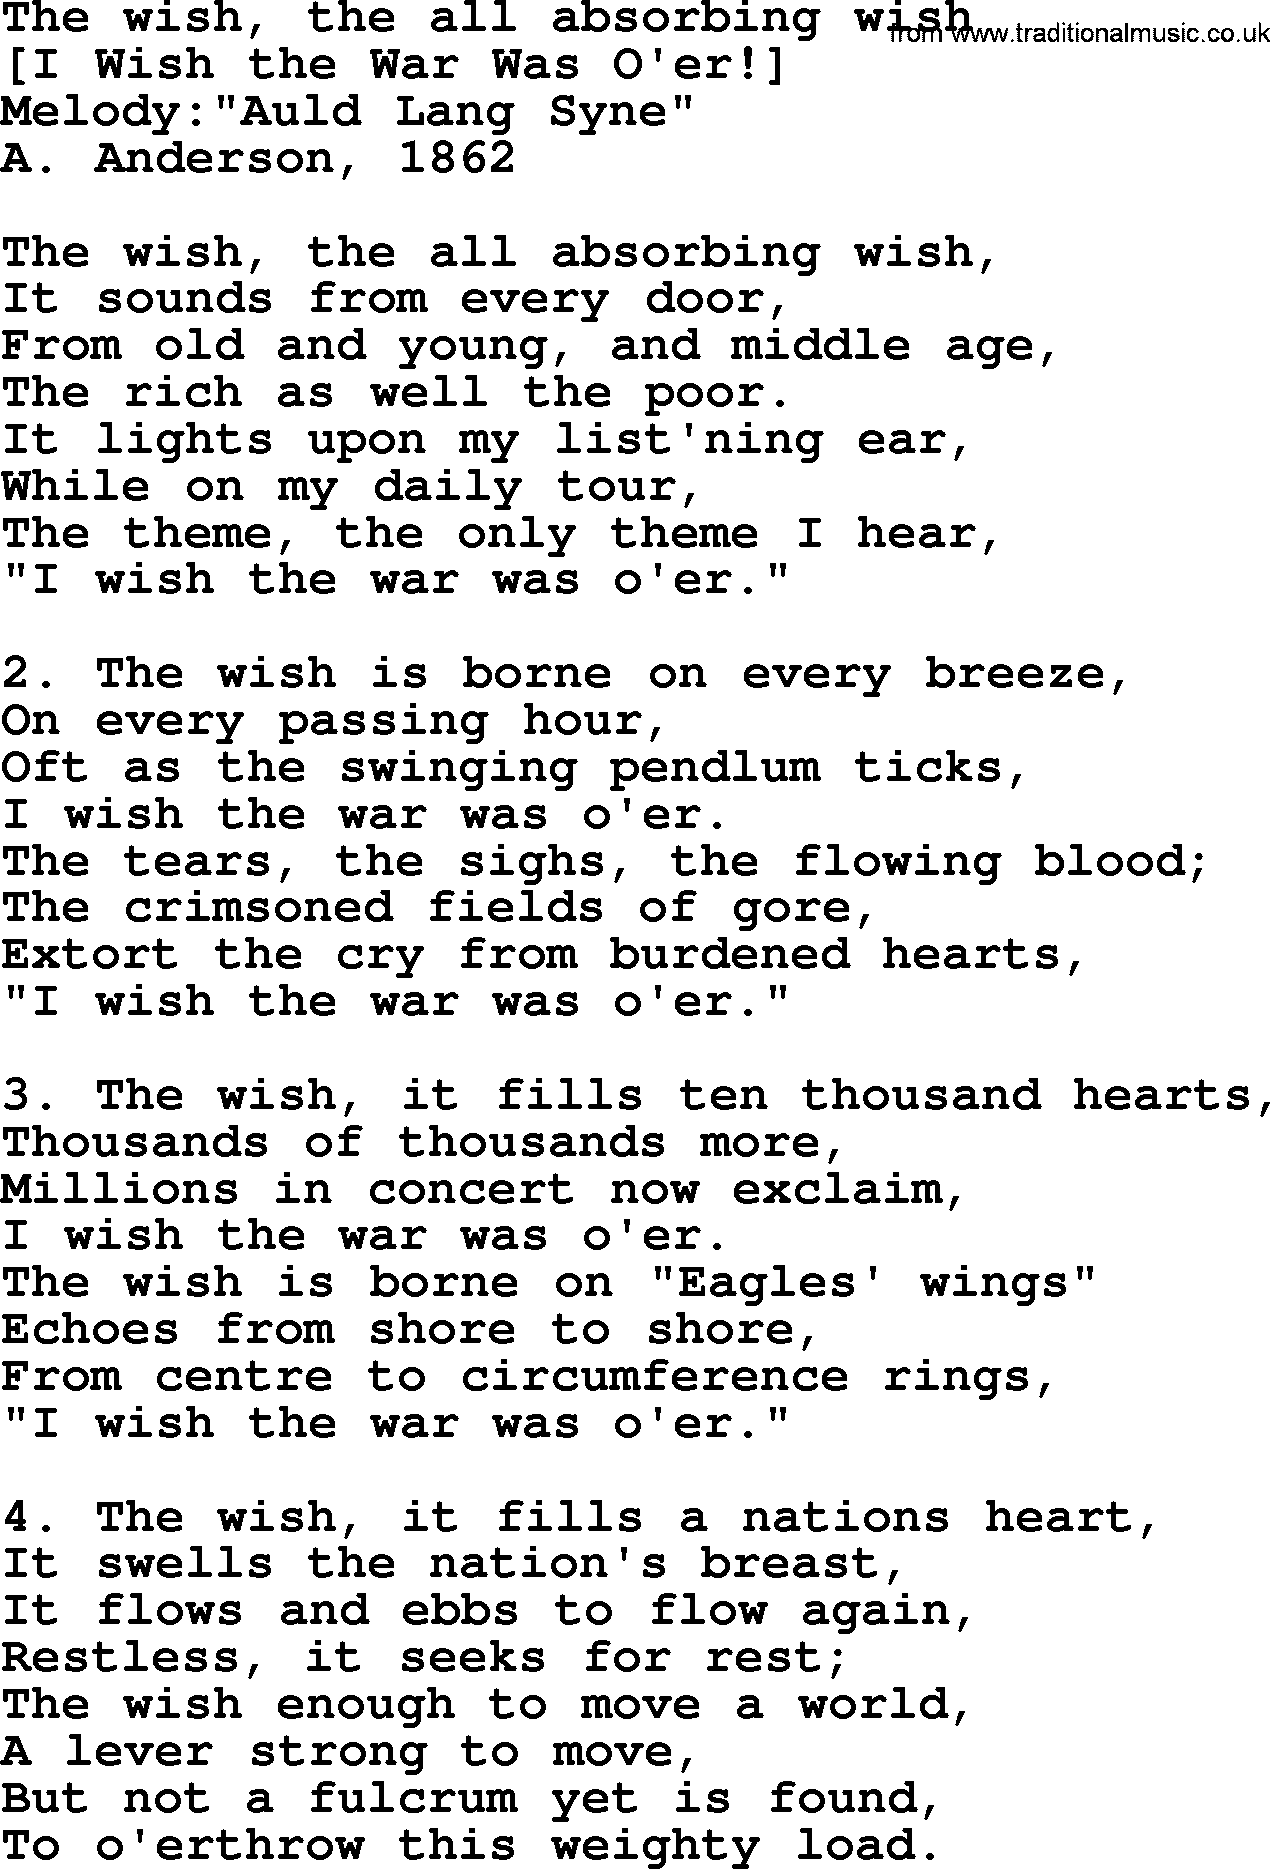 Old American Song: The Wish, The All Absorbing Wish, lyrics